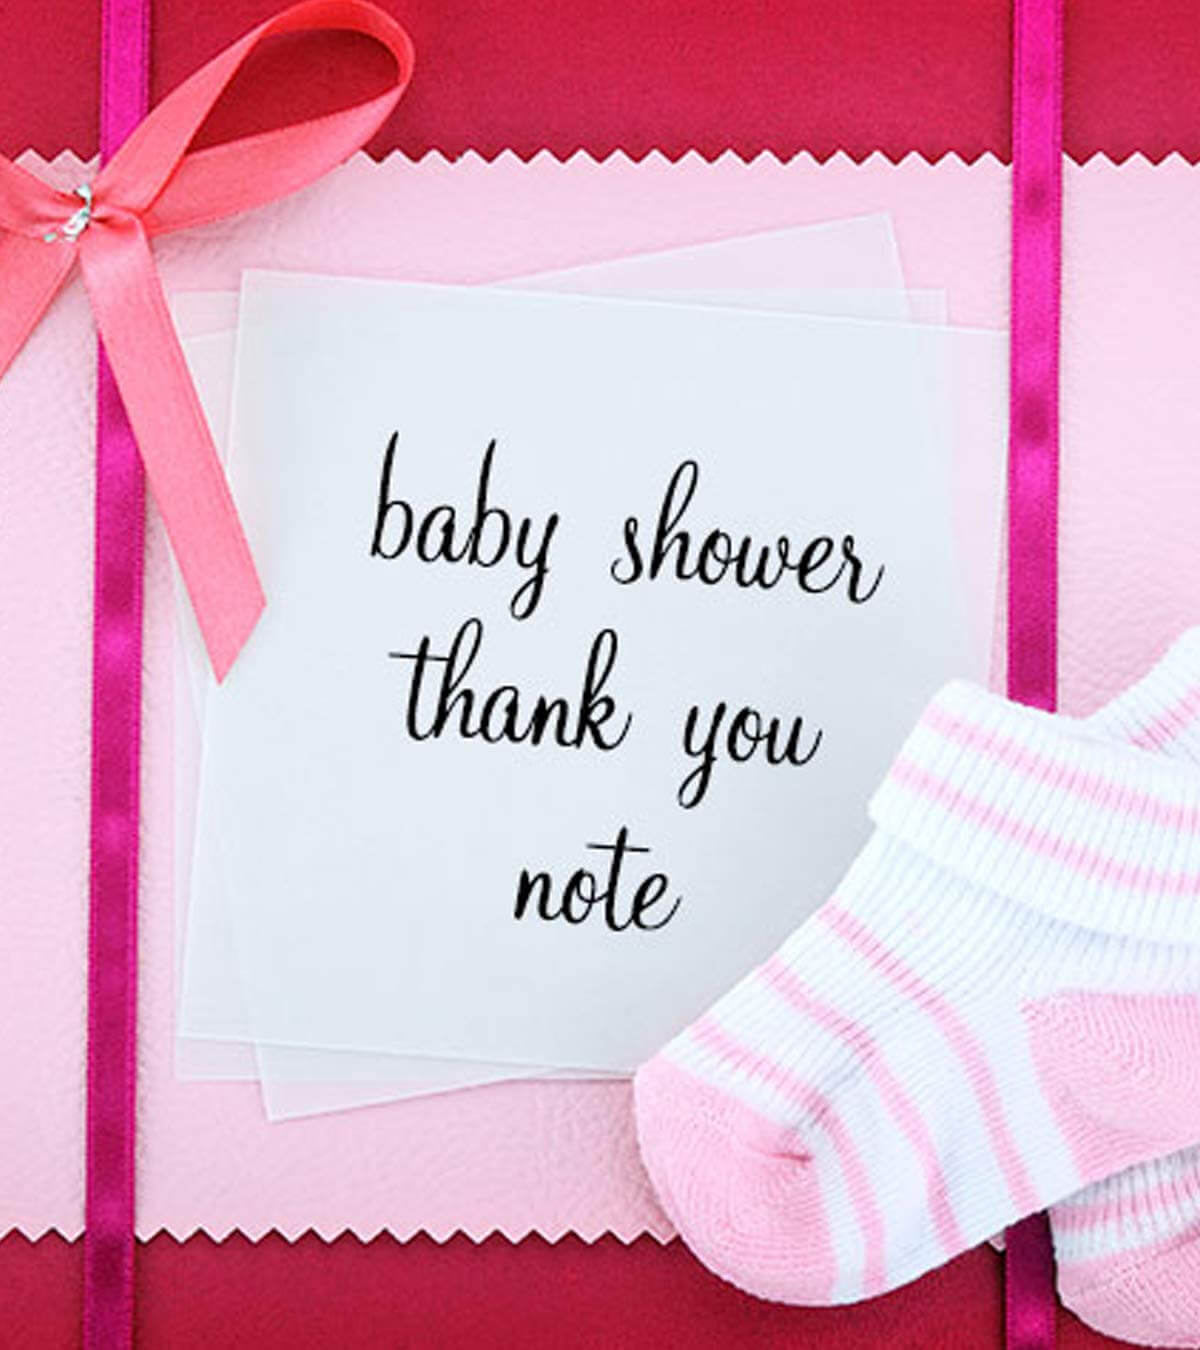 Baby Shower Thank You Notes: What To Write In A Thank You Card For Template For Baby Shower Thank You Cards